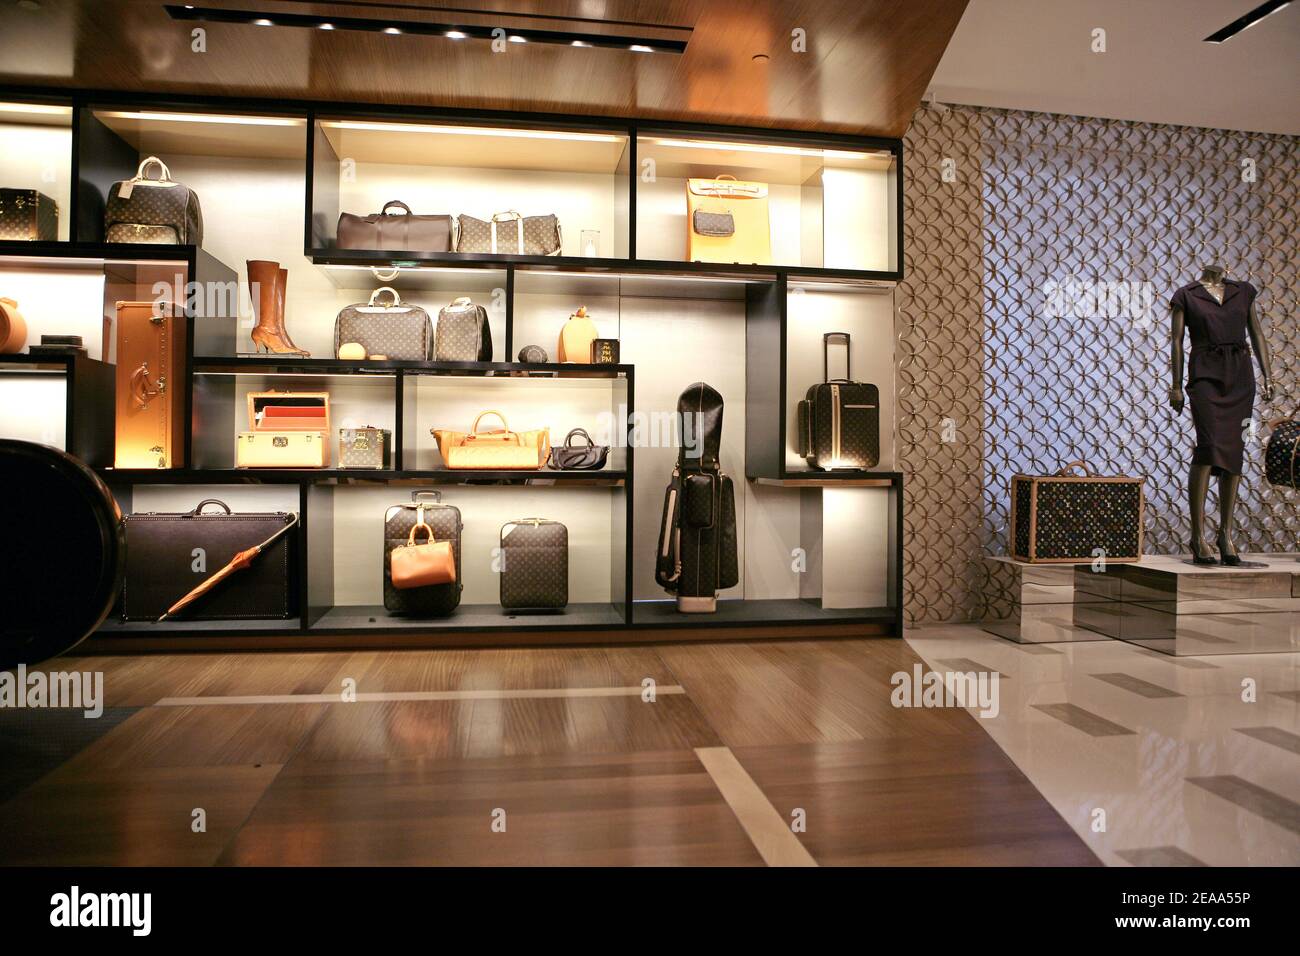 Inside view of the new Louis Vuitton store of the Champs Elysees